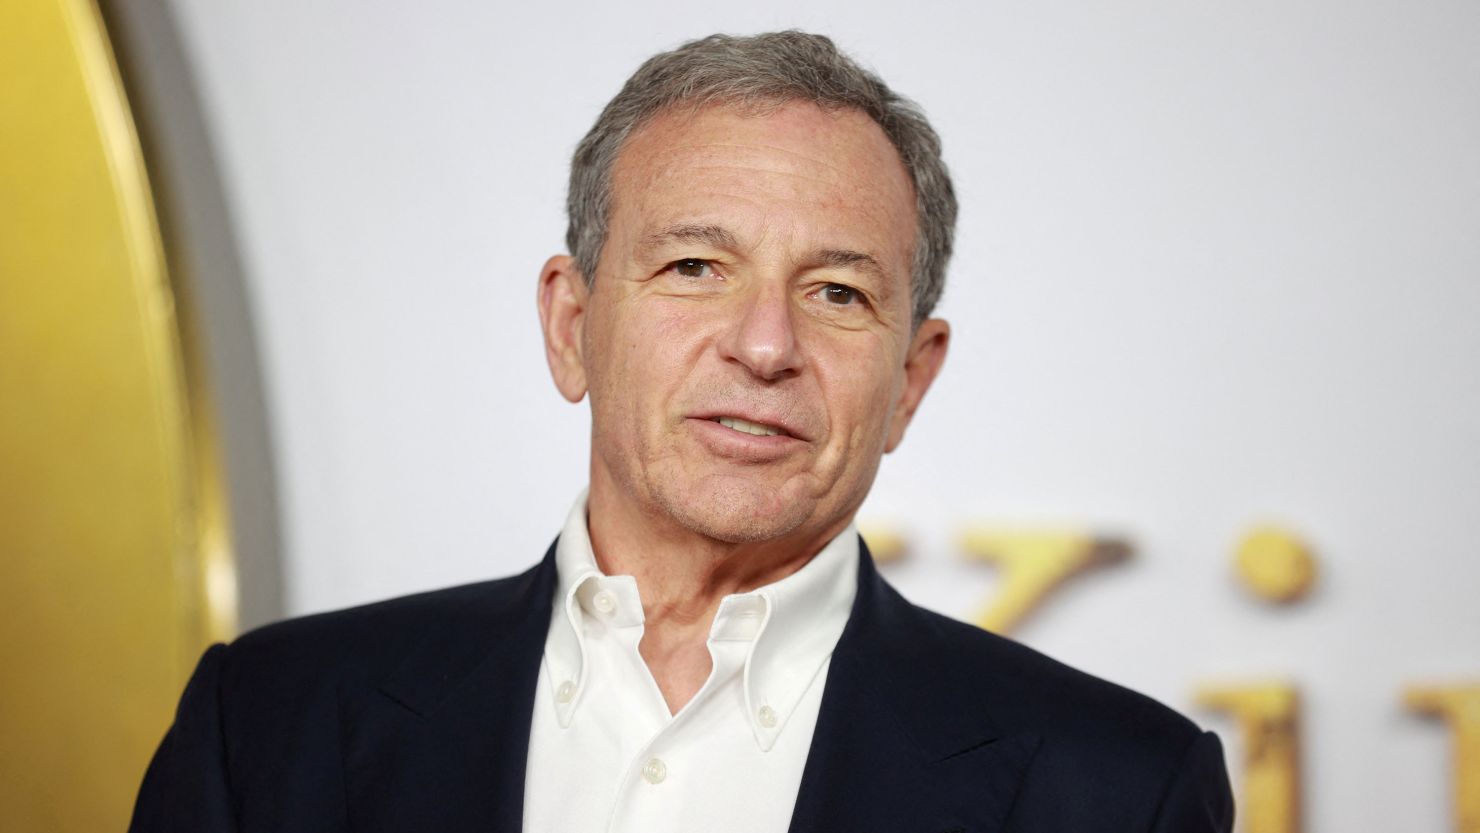 Bob Iger arrives at the world premiere for the film 'The King's Man' at Leicester Square in London, Britain December 6, 2021.